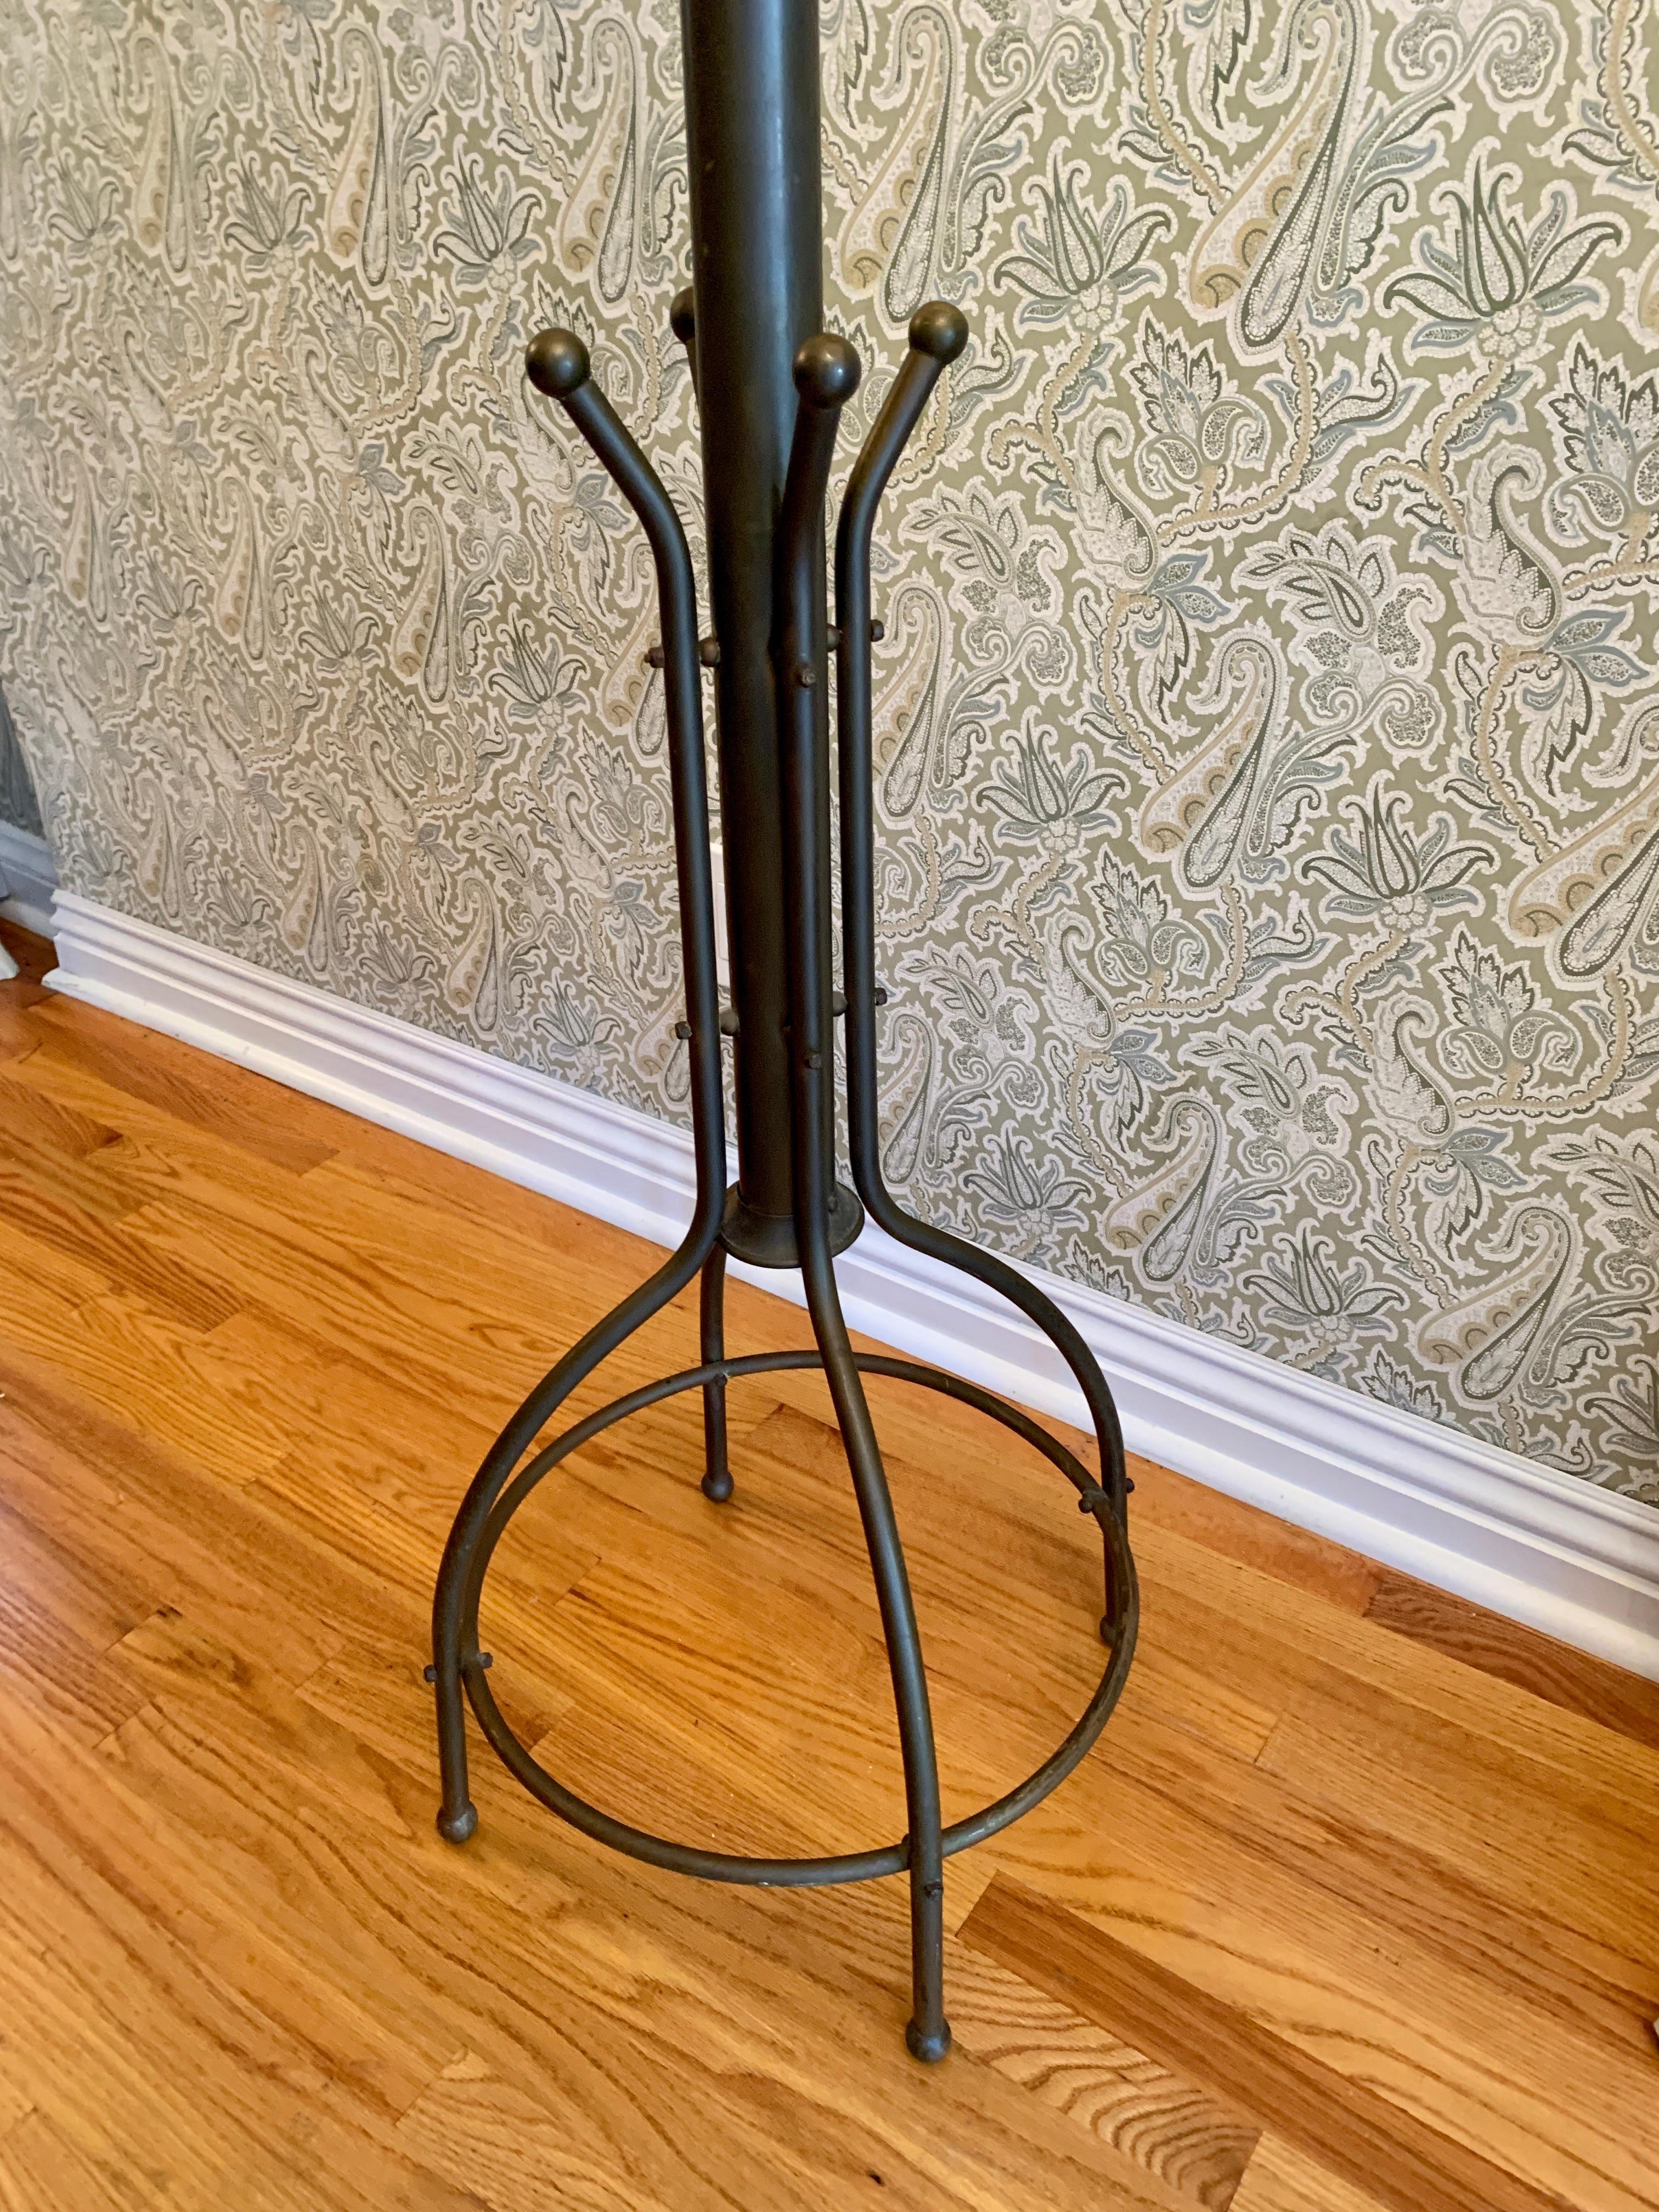 A beautifully made and patinated coat rack or hall tree with enough hooks for 4-8 coats and additional four for hats and scarves. Very good condition.

We have left the wonderful patina, which truly is very consistent and impossible to achieve